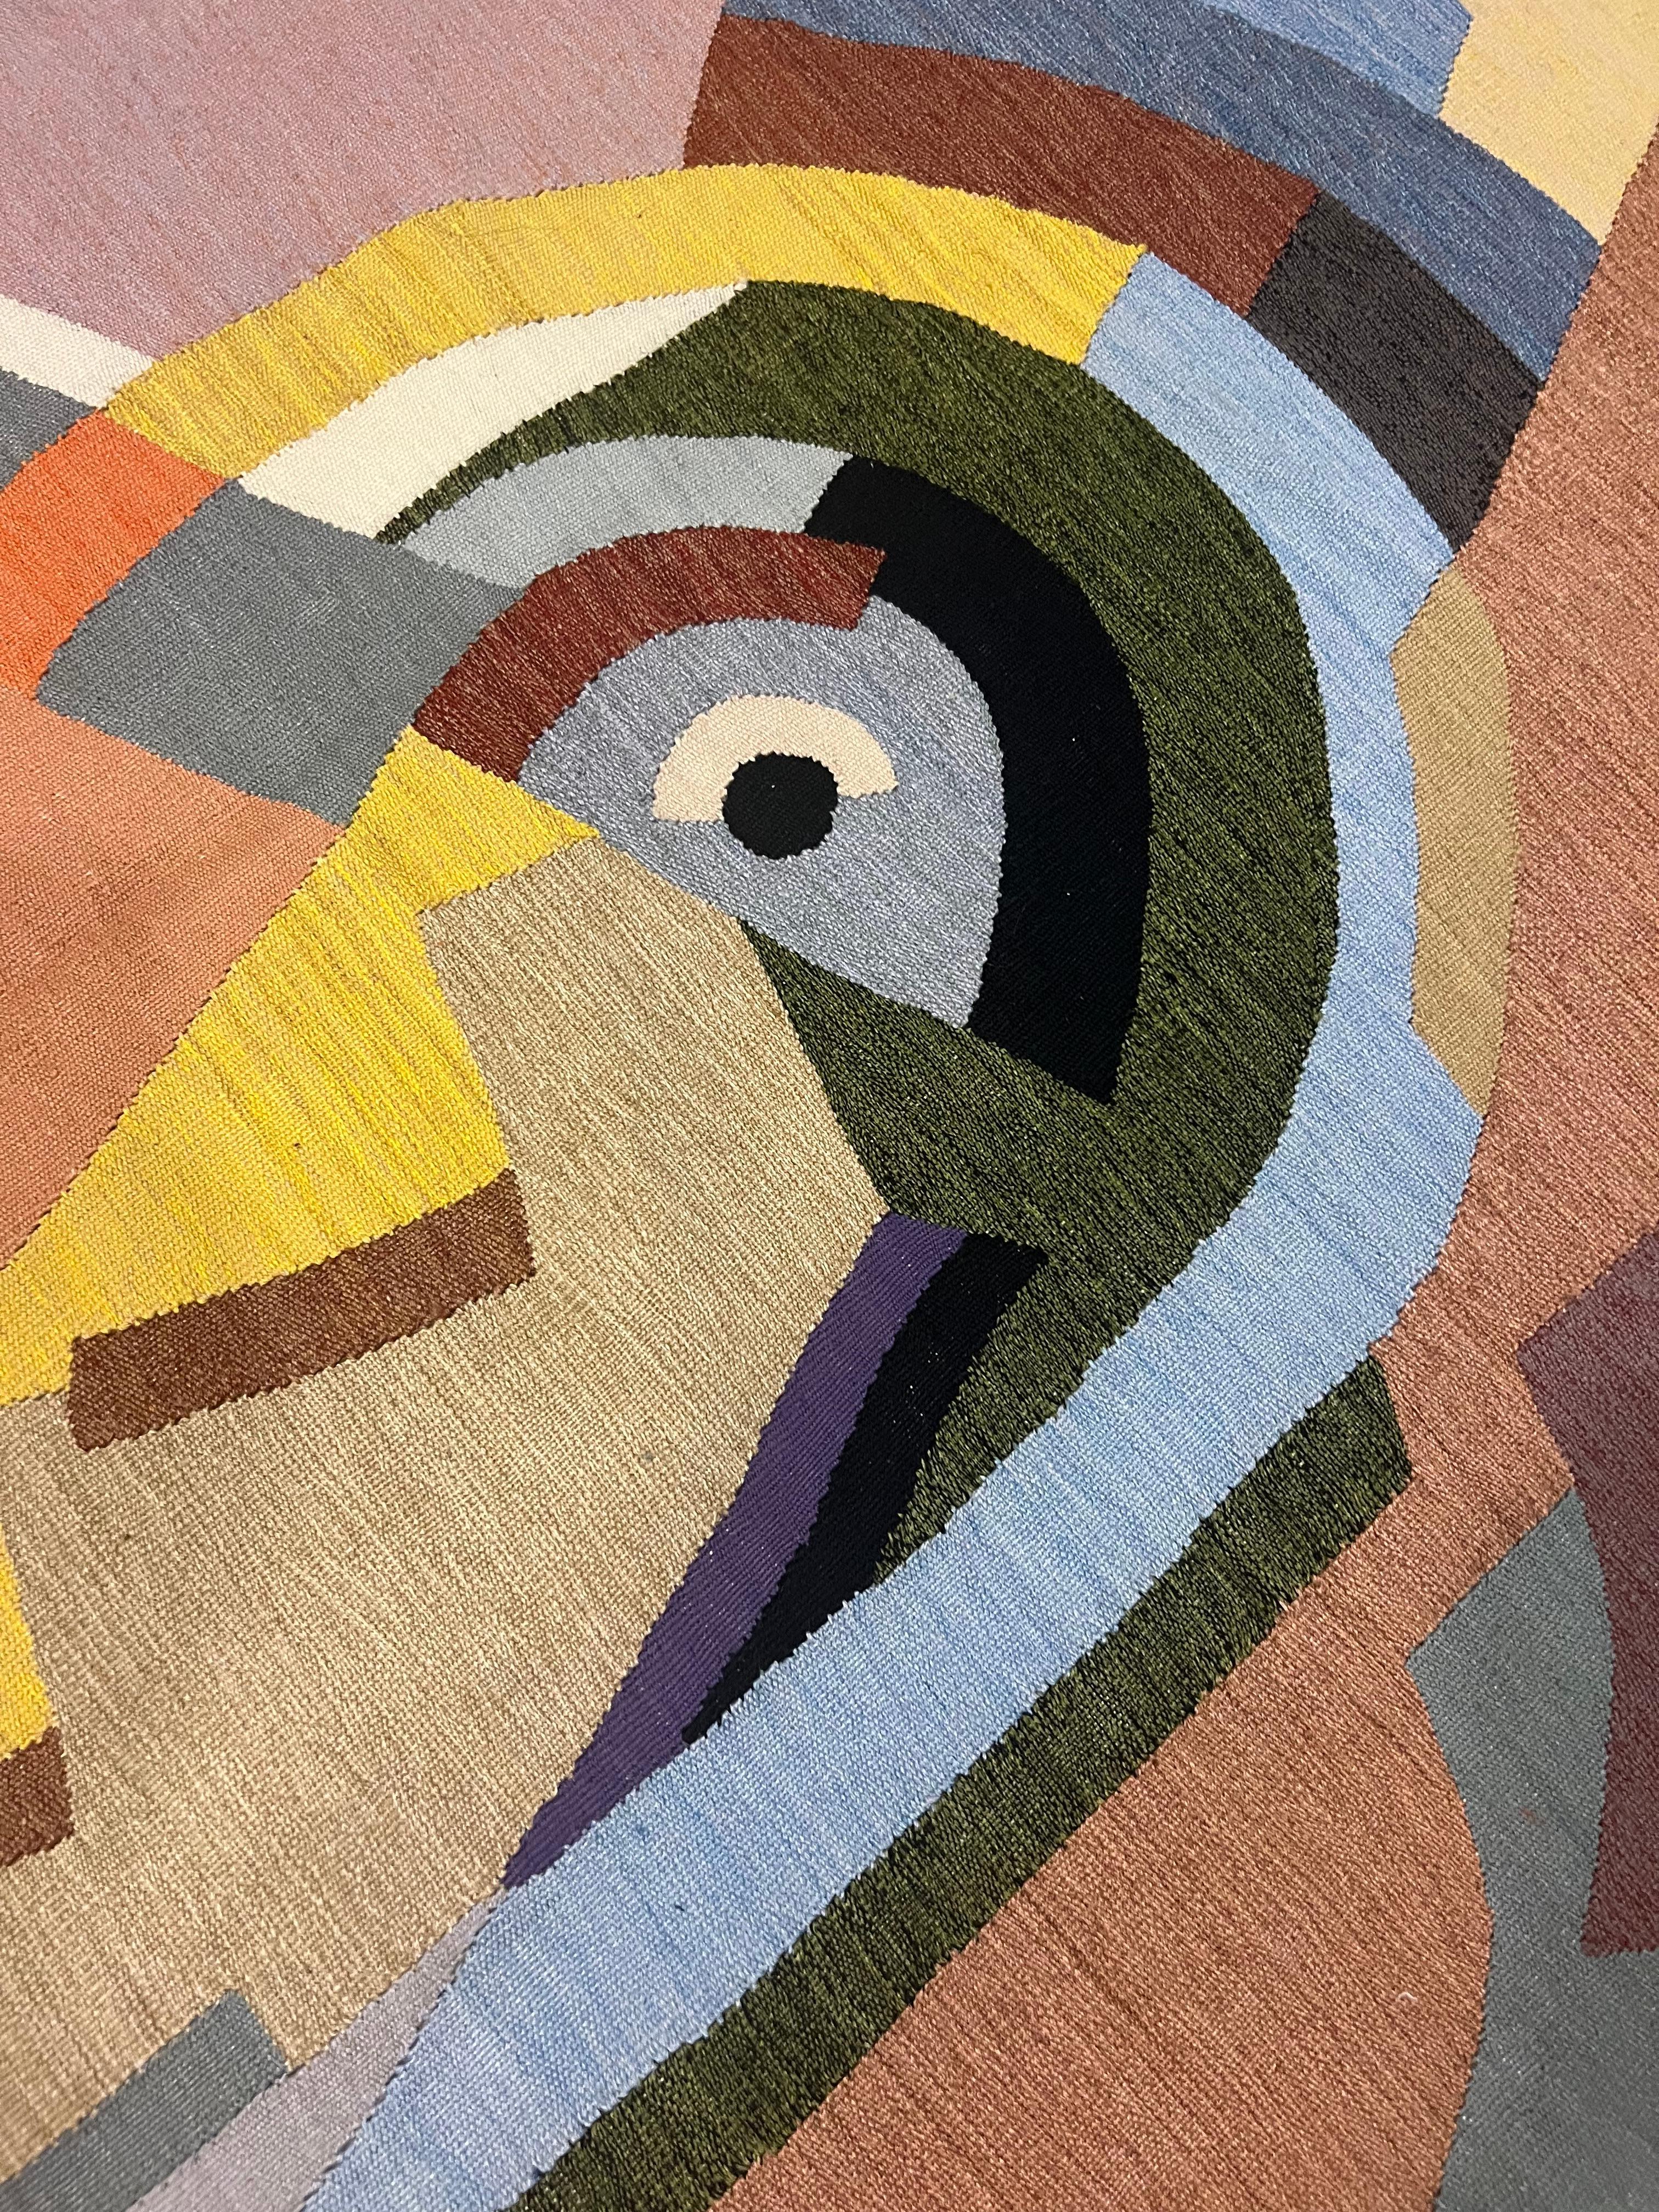 Albert Gleizes

Tapestry after Design N. 41

Woven in 2005, Design made 1915-25

Wool

239 x 137 cm, 94 x 54 in

Manufactured by Atelier Boccara